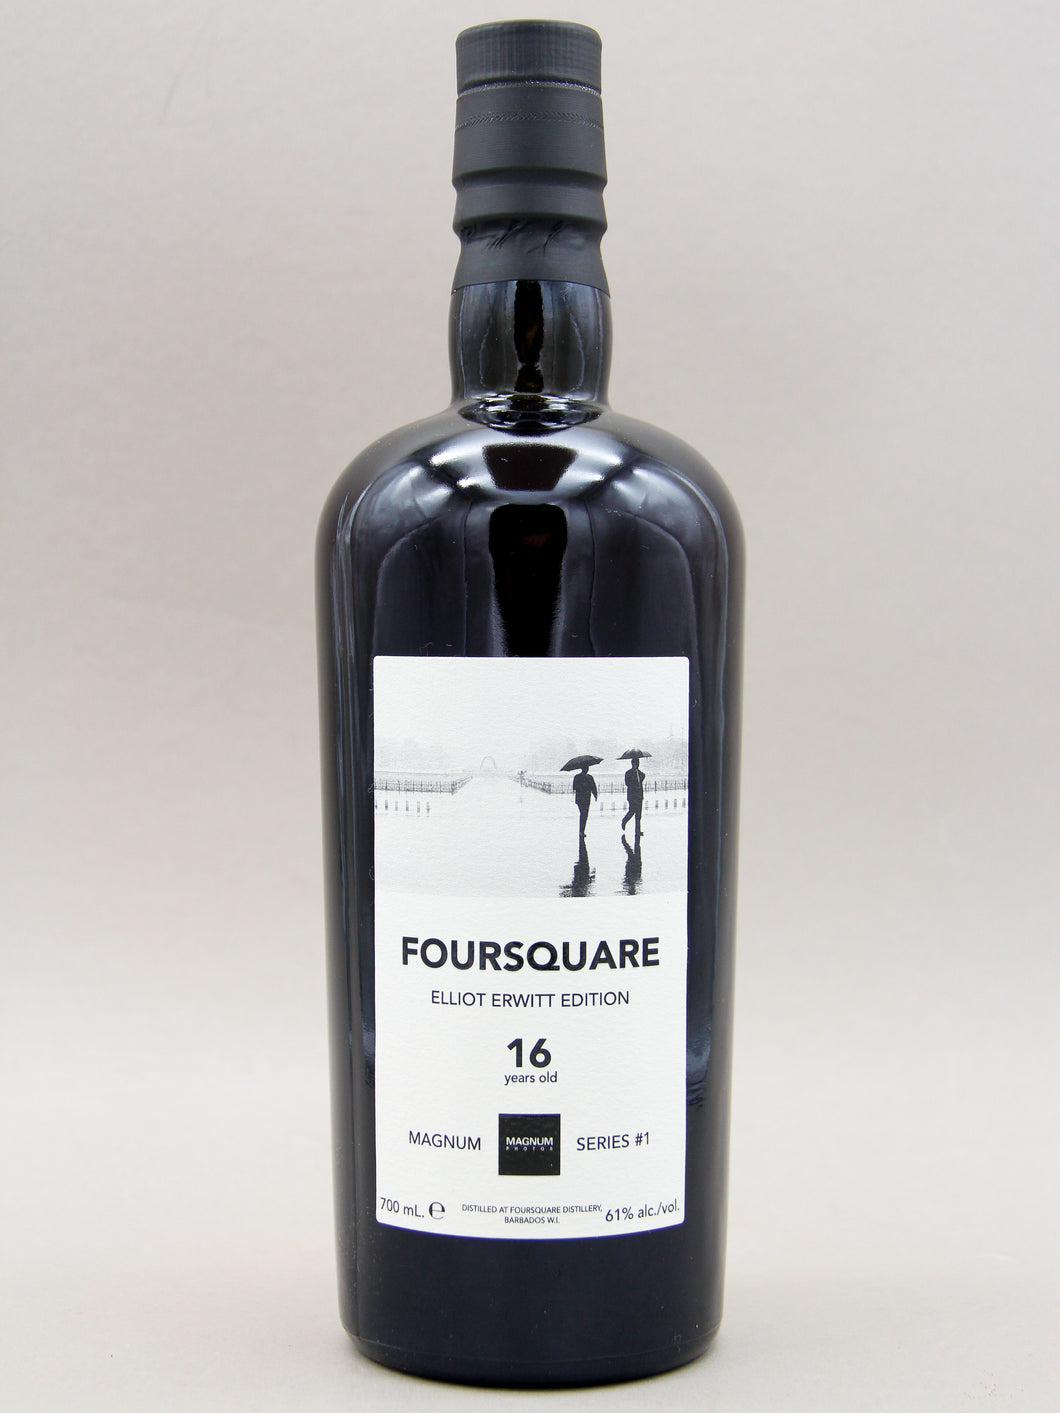 Foursquare Pure Single Blended Rum, 16 Years Old, Elliott Erwitt Edition, Magnum Series #1, Barbados, 2005 (61%, 70cl)